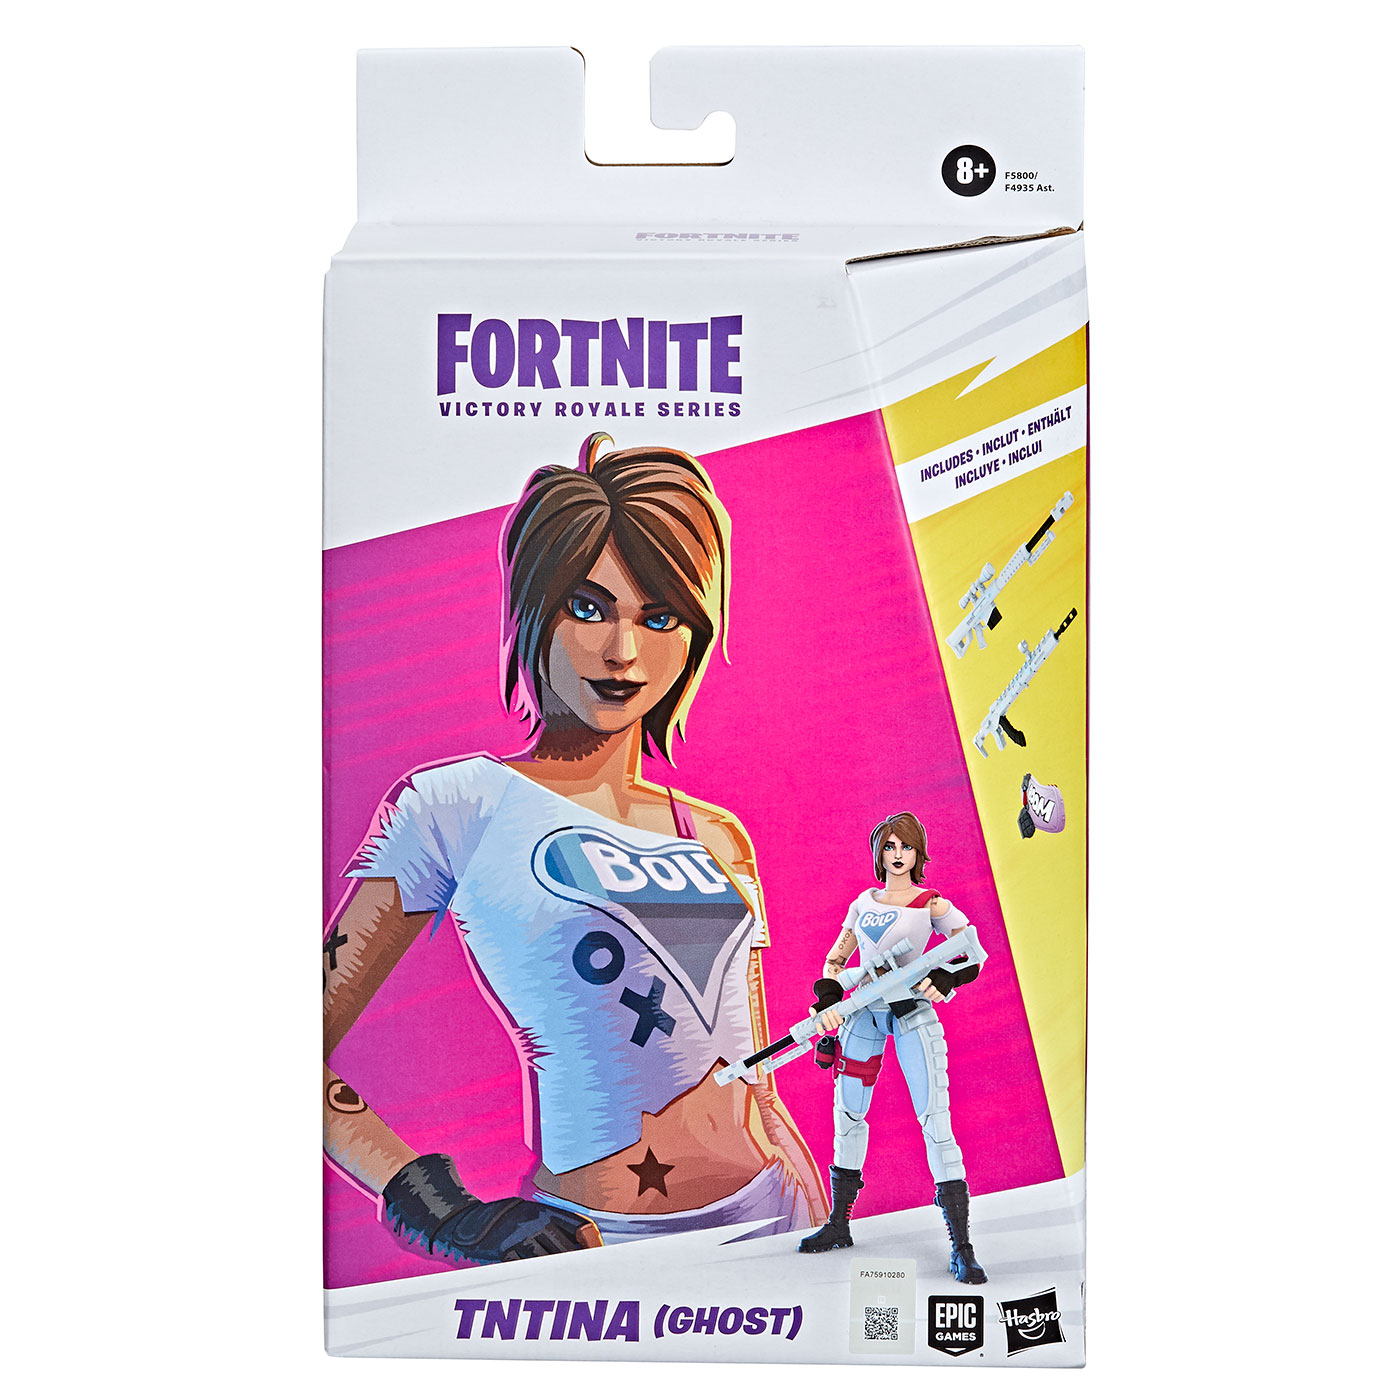 Fortnite Victory Royale Series 5.0 Tntina Ghost 6-Inch Action Figure画像